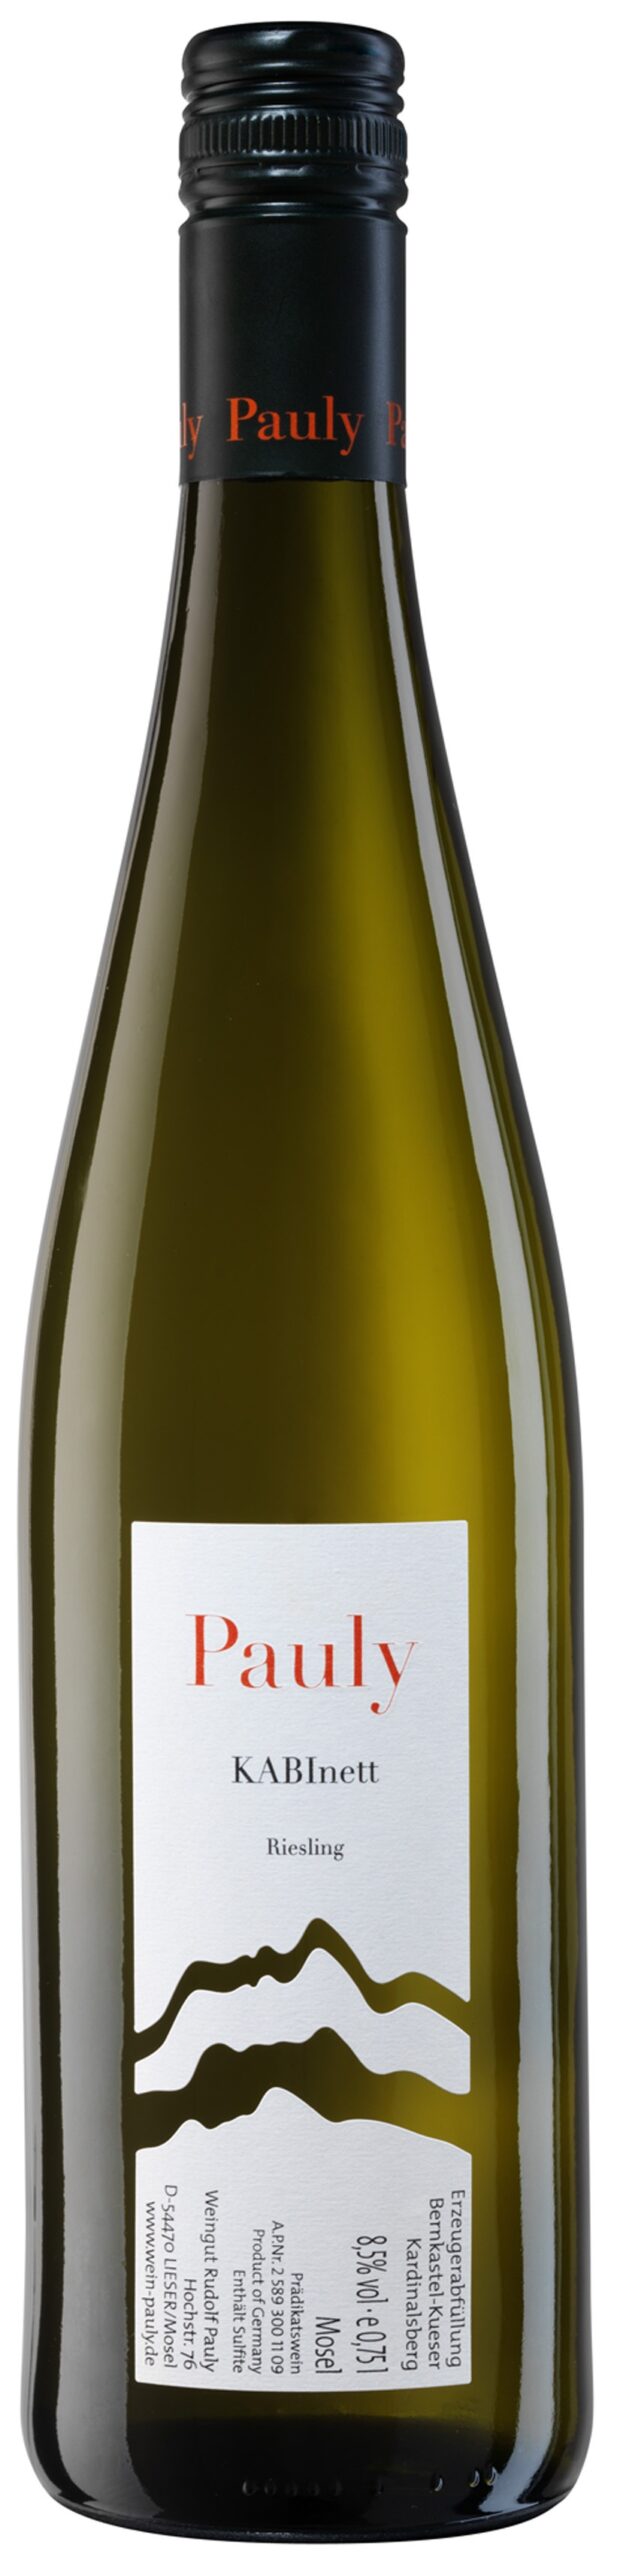 Vins Allemagne Riesling Axel Pauly vins étrangers South World Wines